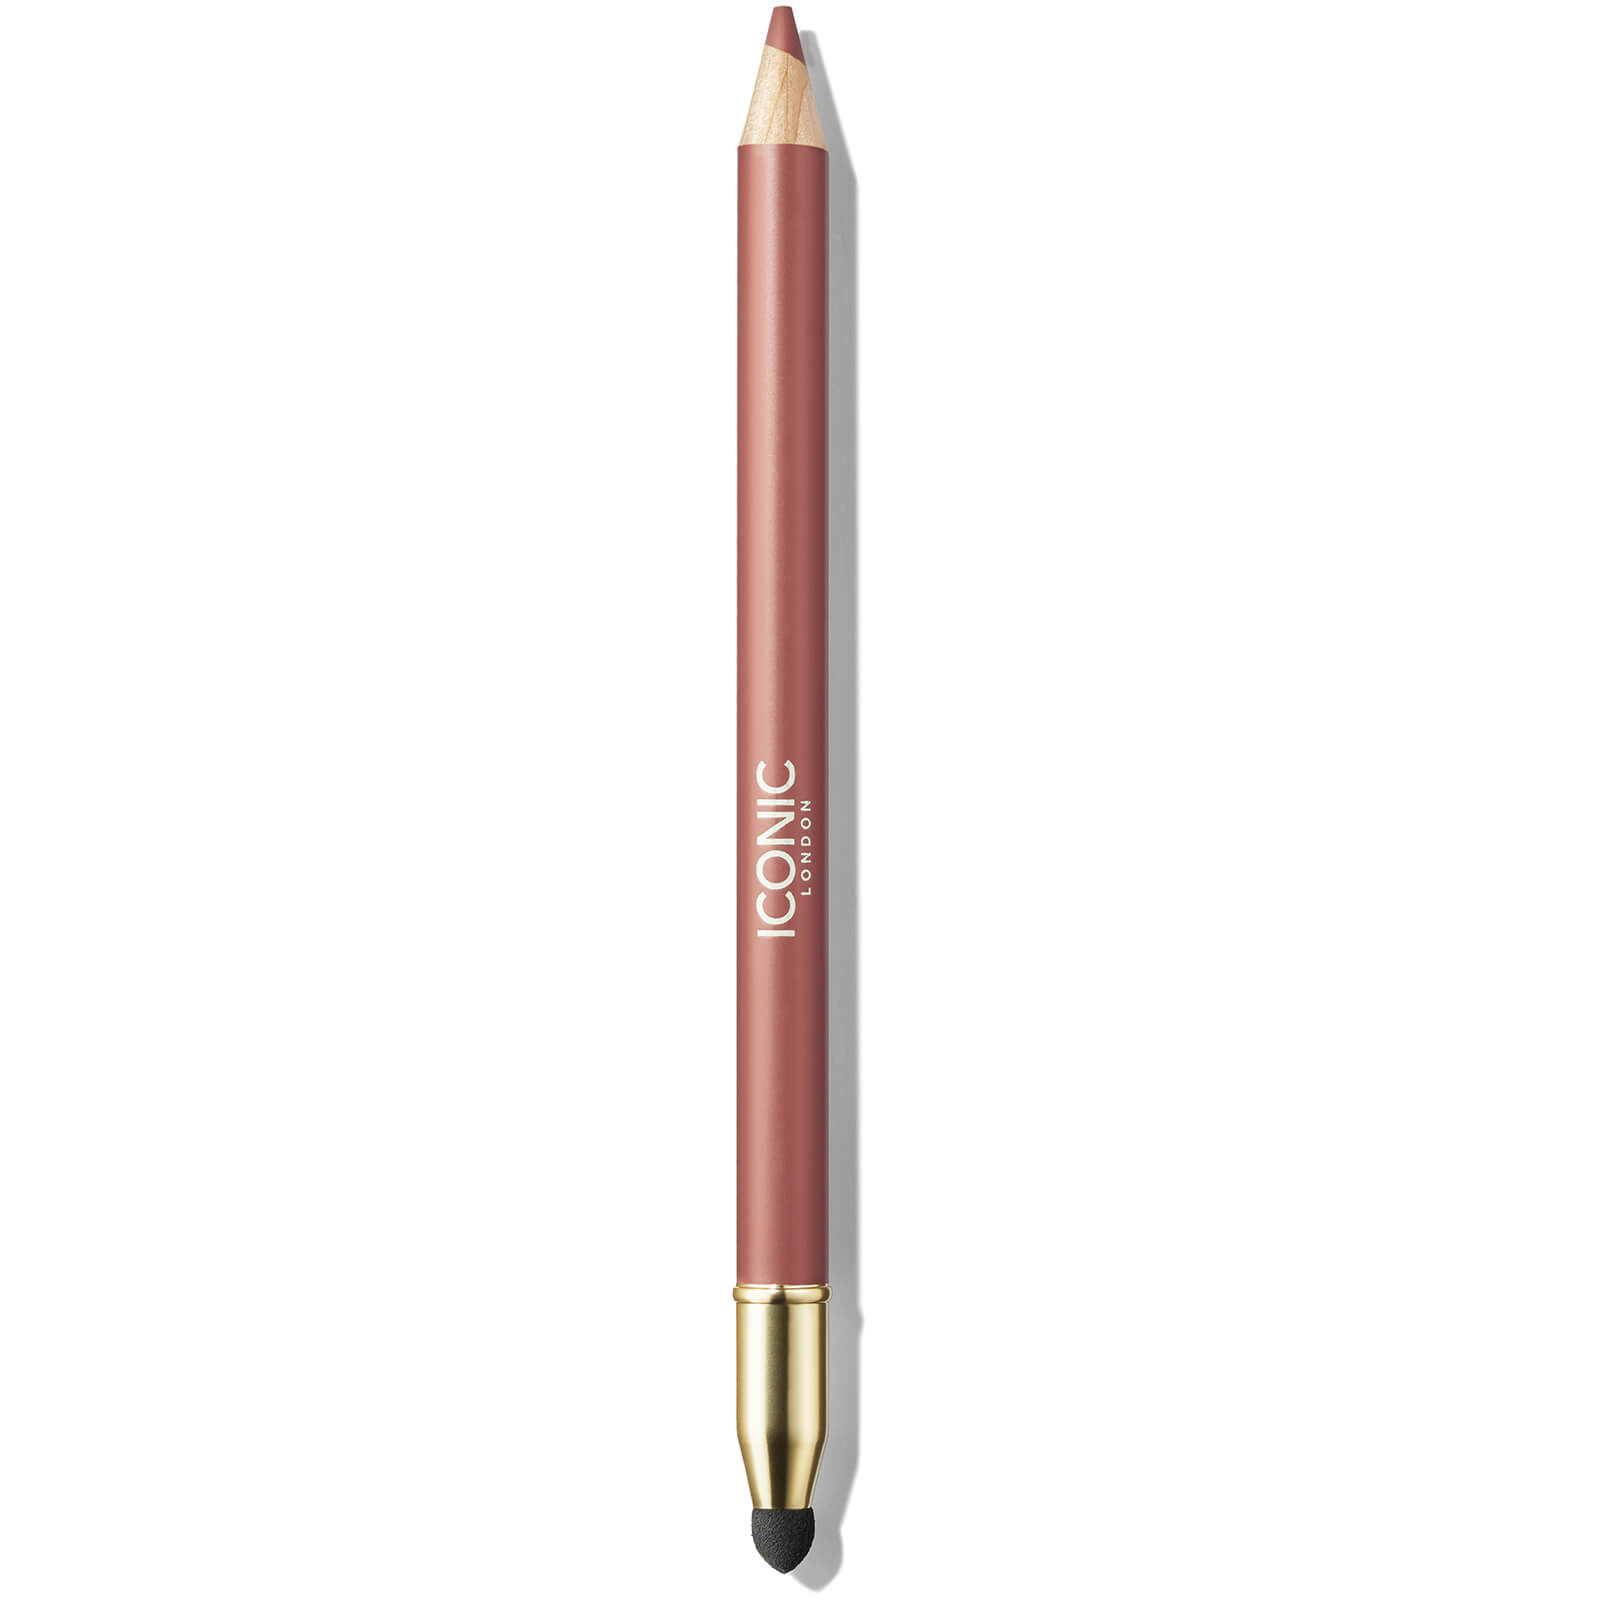 Image of ICONIC London Fuller Pout Sculpting Liner Liner 1.03g (Various Shades) - Sister Sister